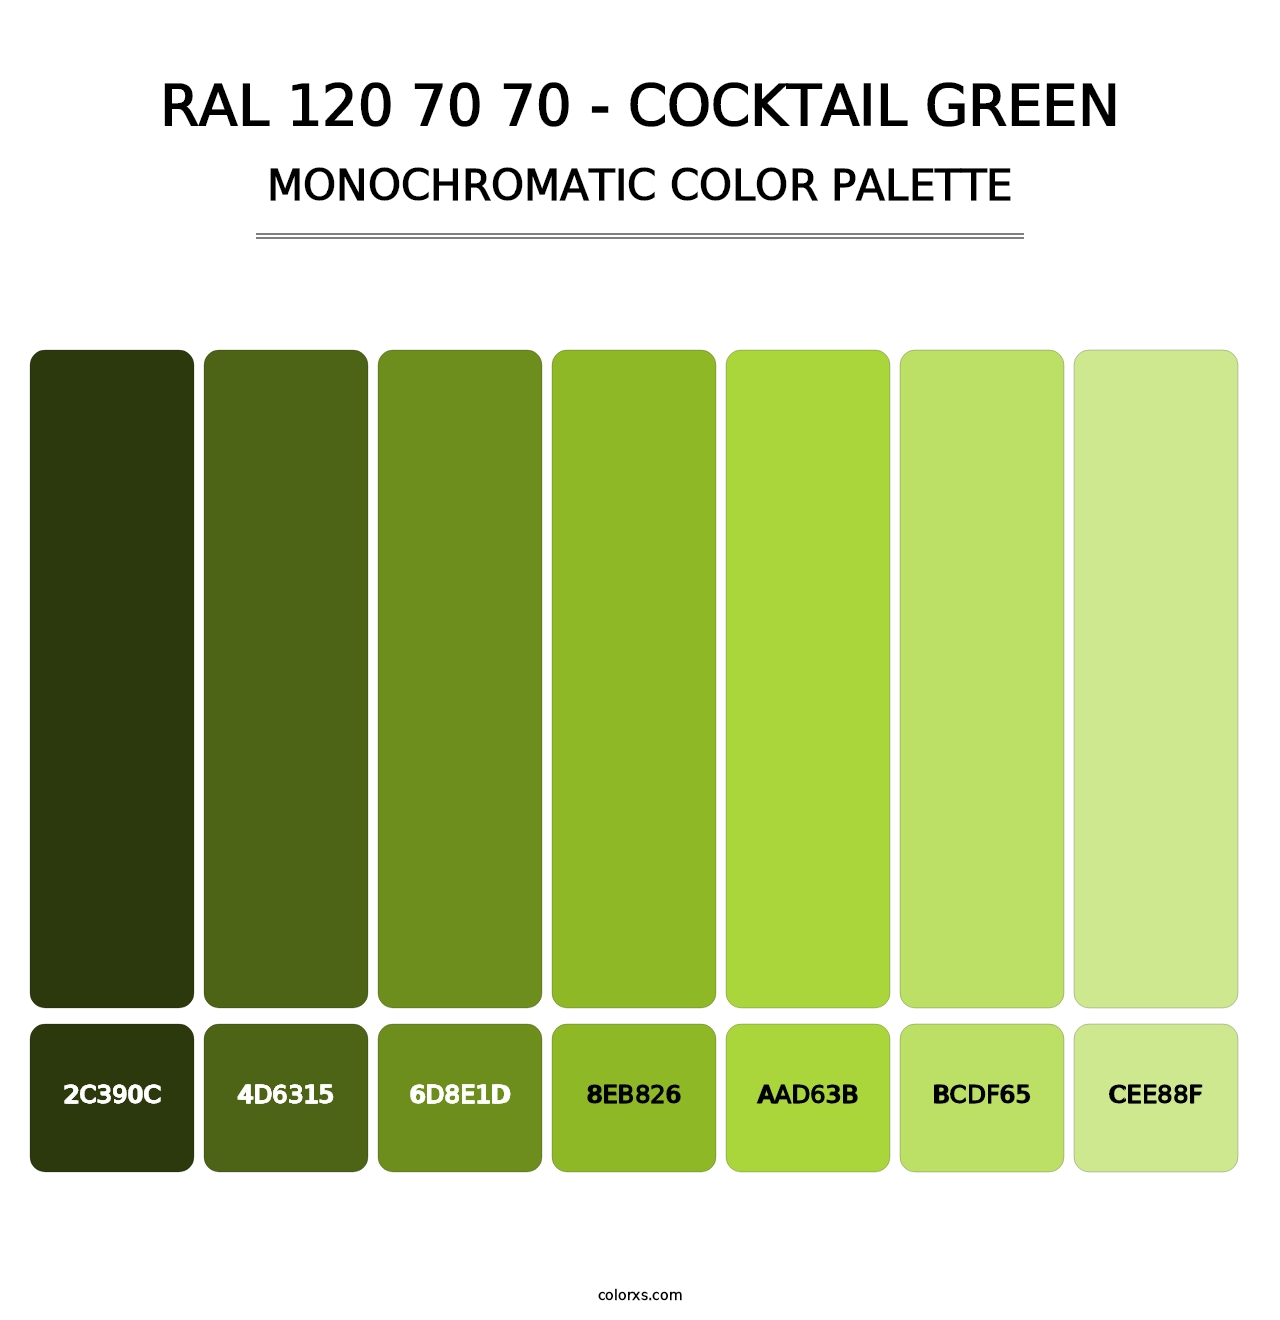 RAL 120 70 70 - Cocktail Green - Monochromatic Color Palette